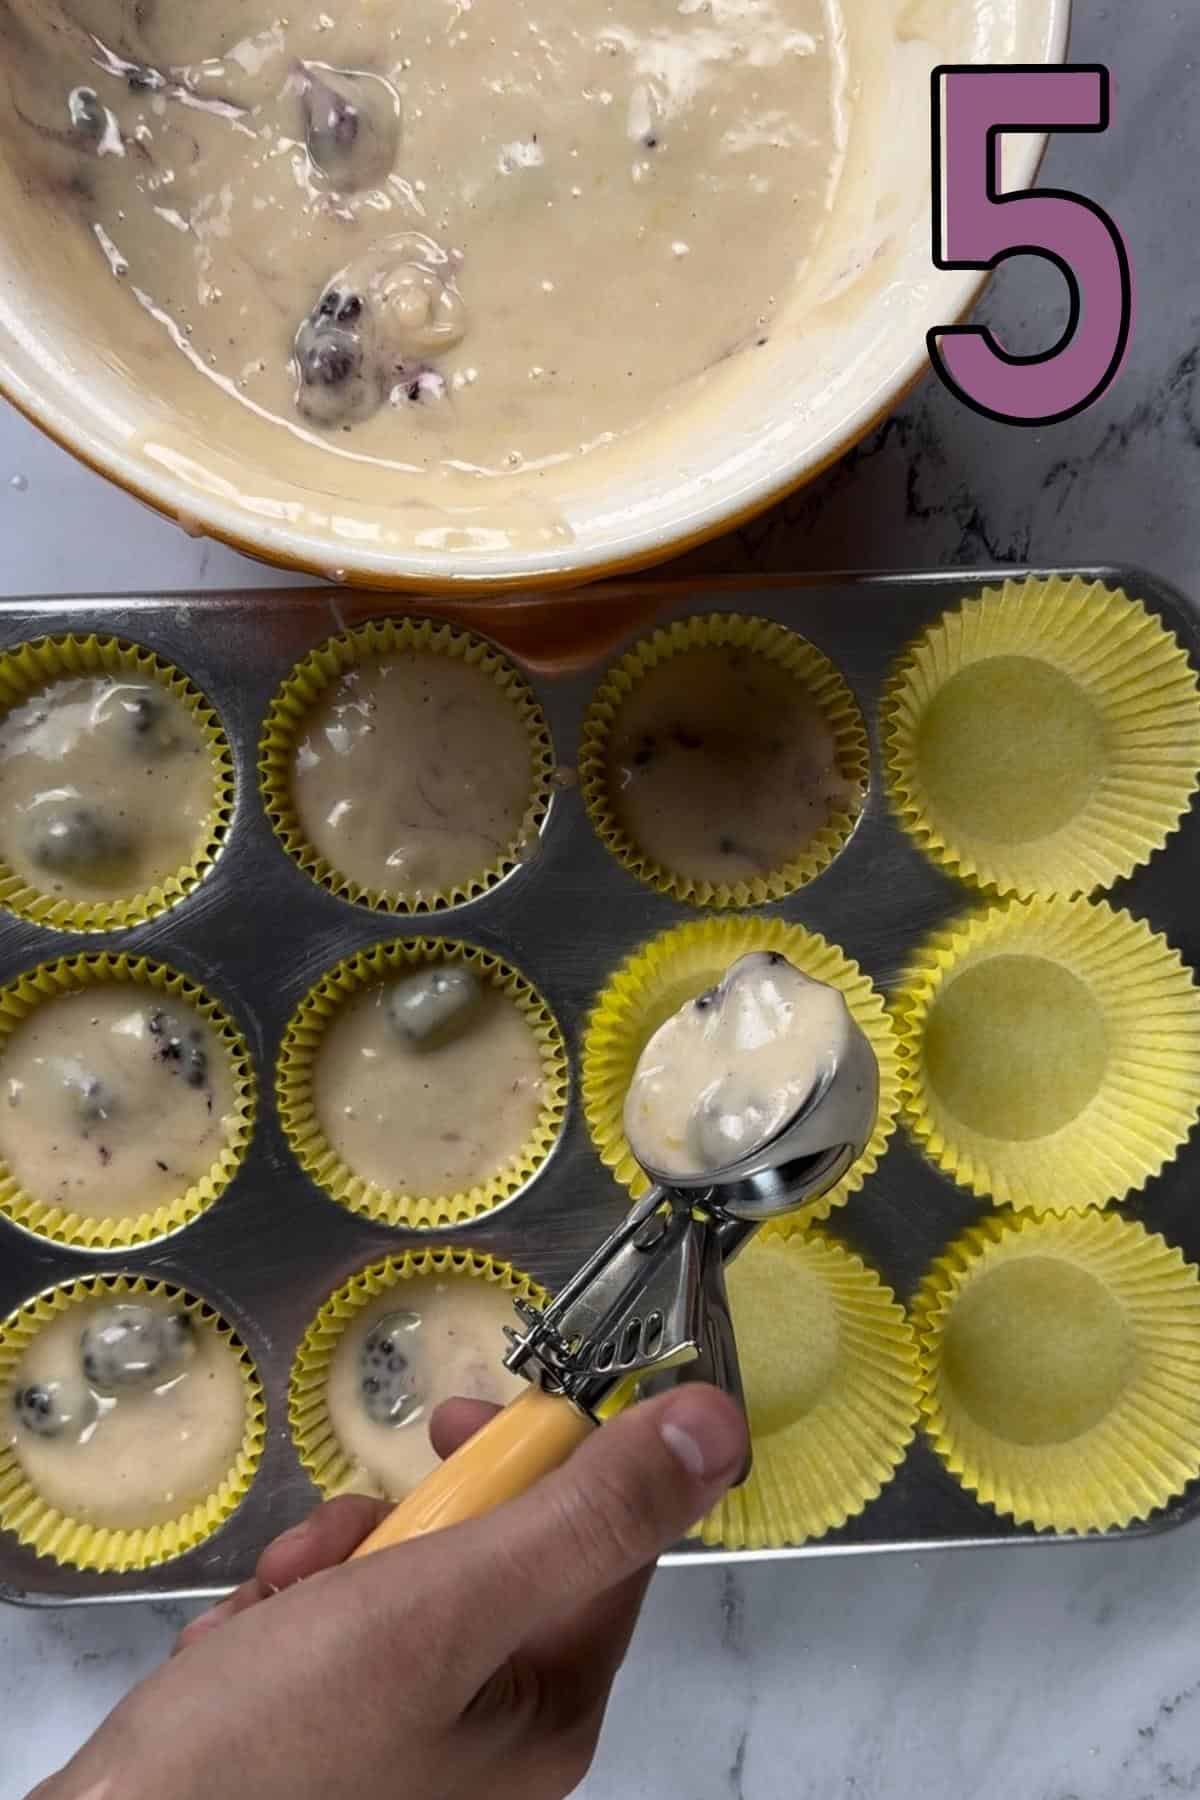 Filling up the muffin liners with batter using an ice-cream scoop.